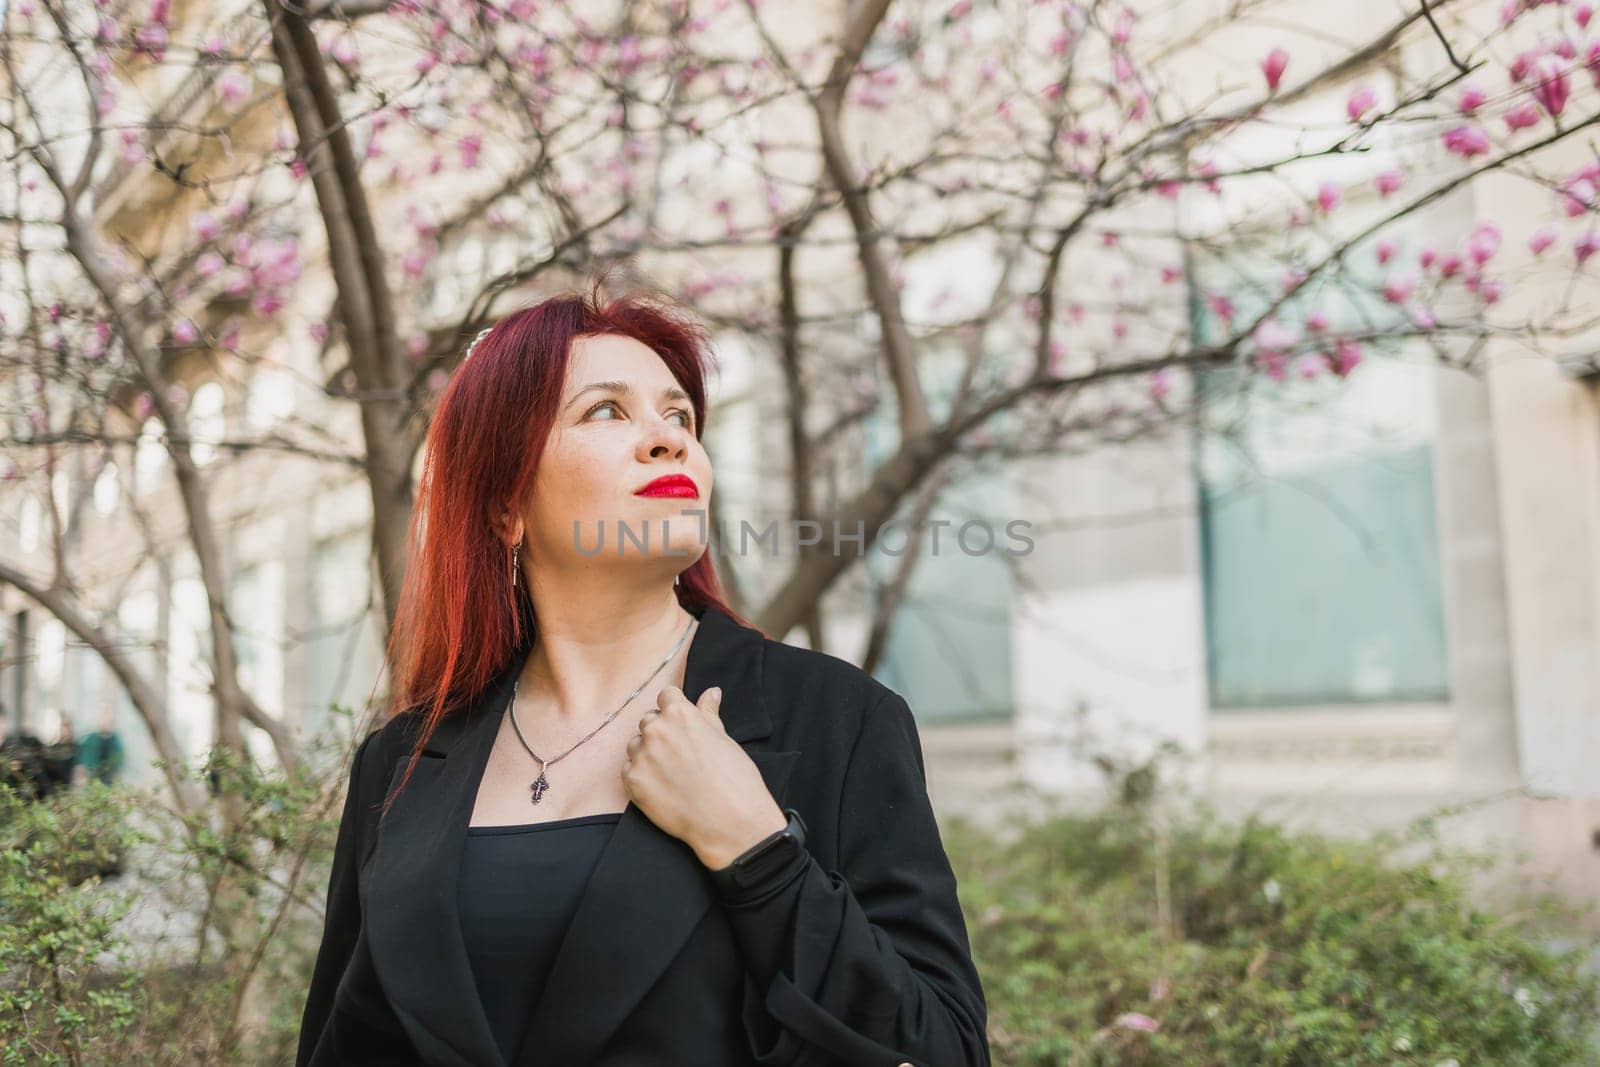 Fashion outdoor photo of beautiful woman with red curly hair in elegant suit posing in spring flowering park with magnolias tree. Copy space and empty place for advertising text.